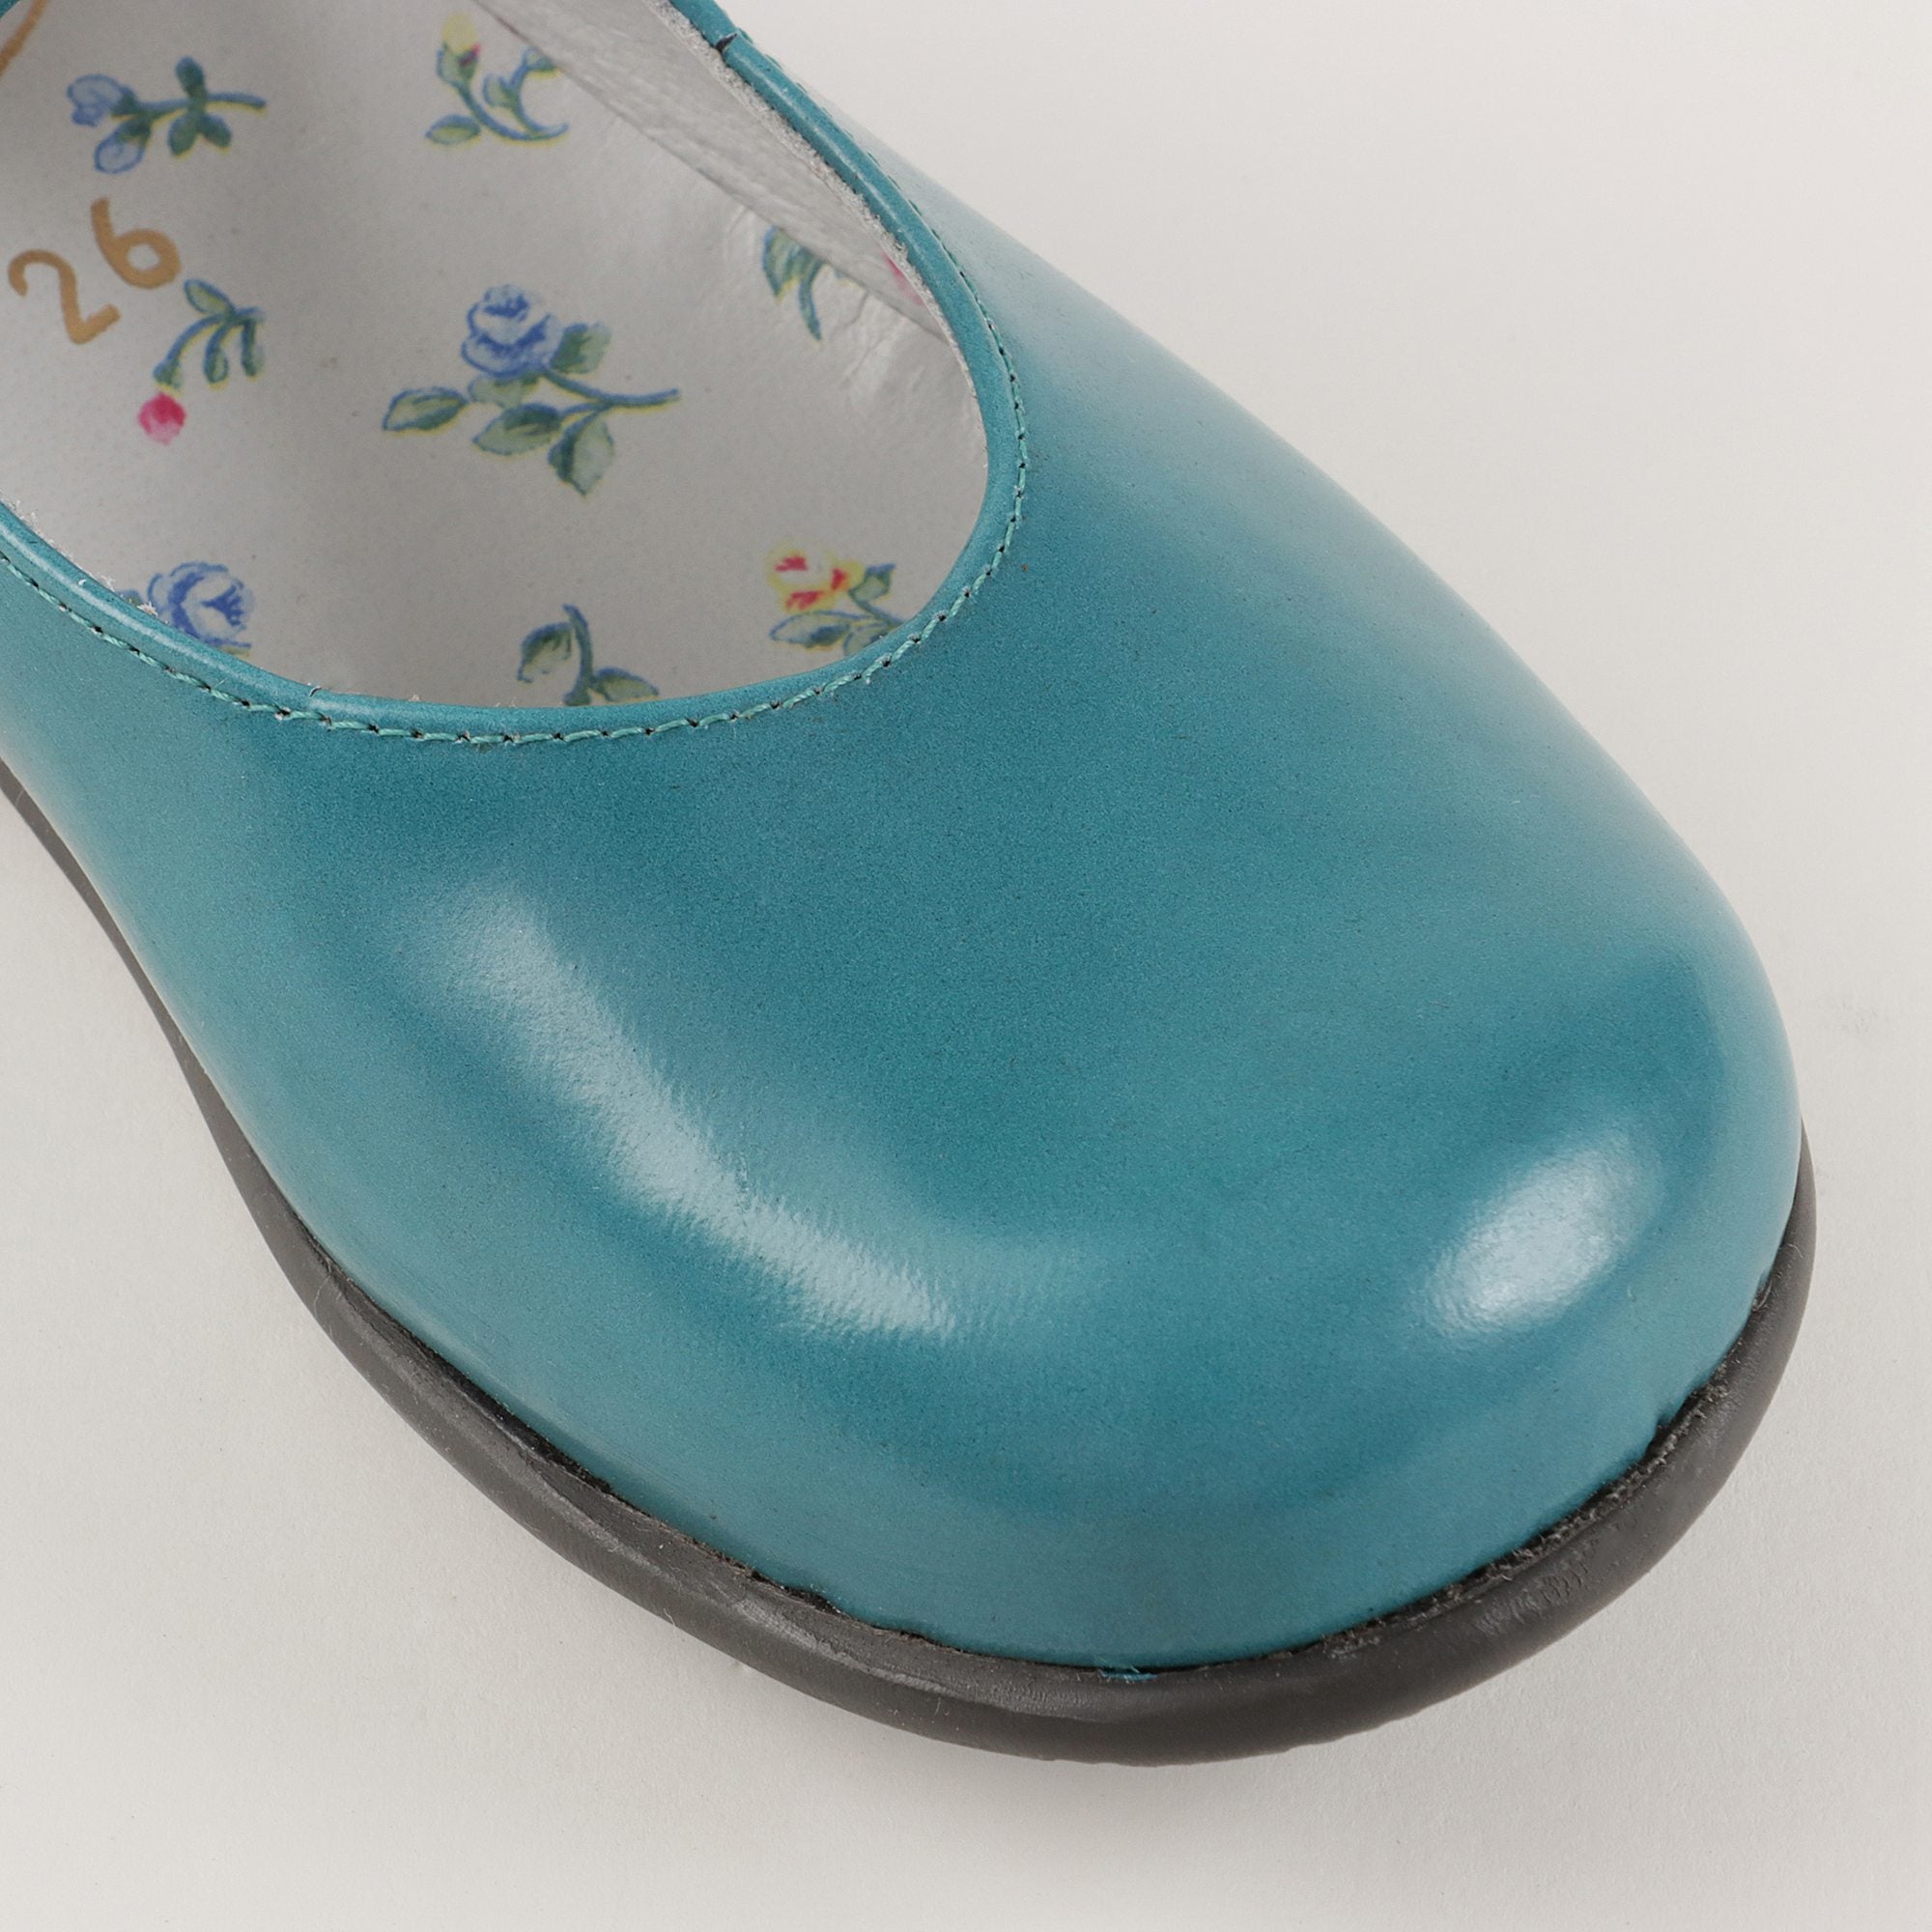 Girls Blue Leather Flat Shoes